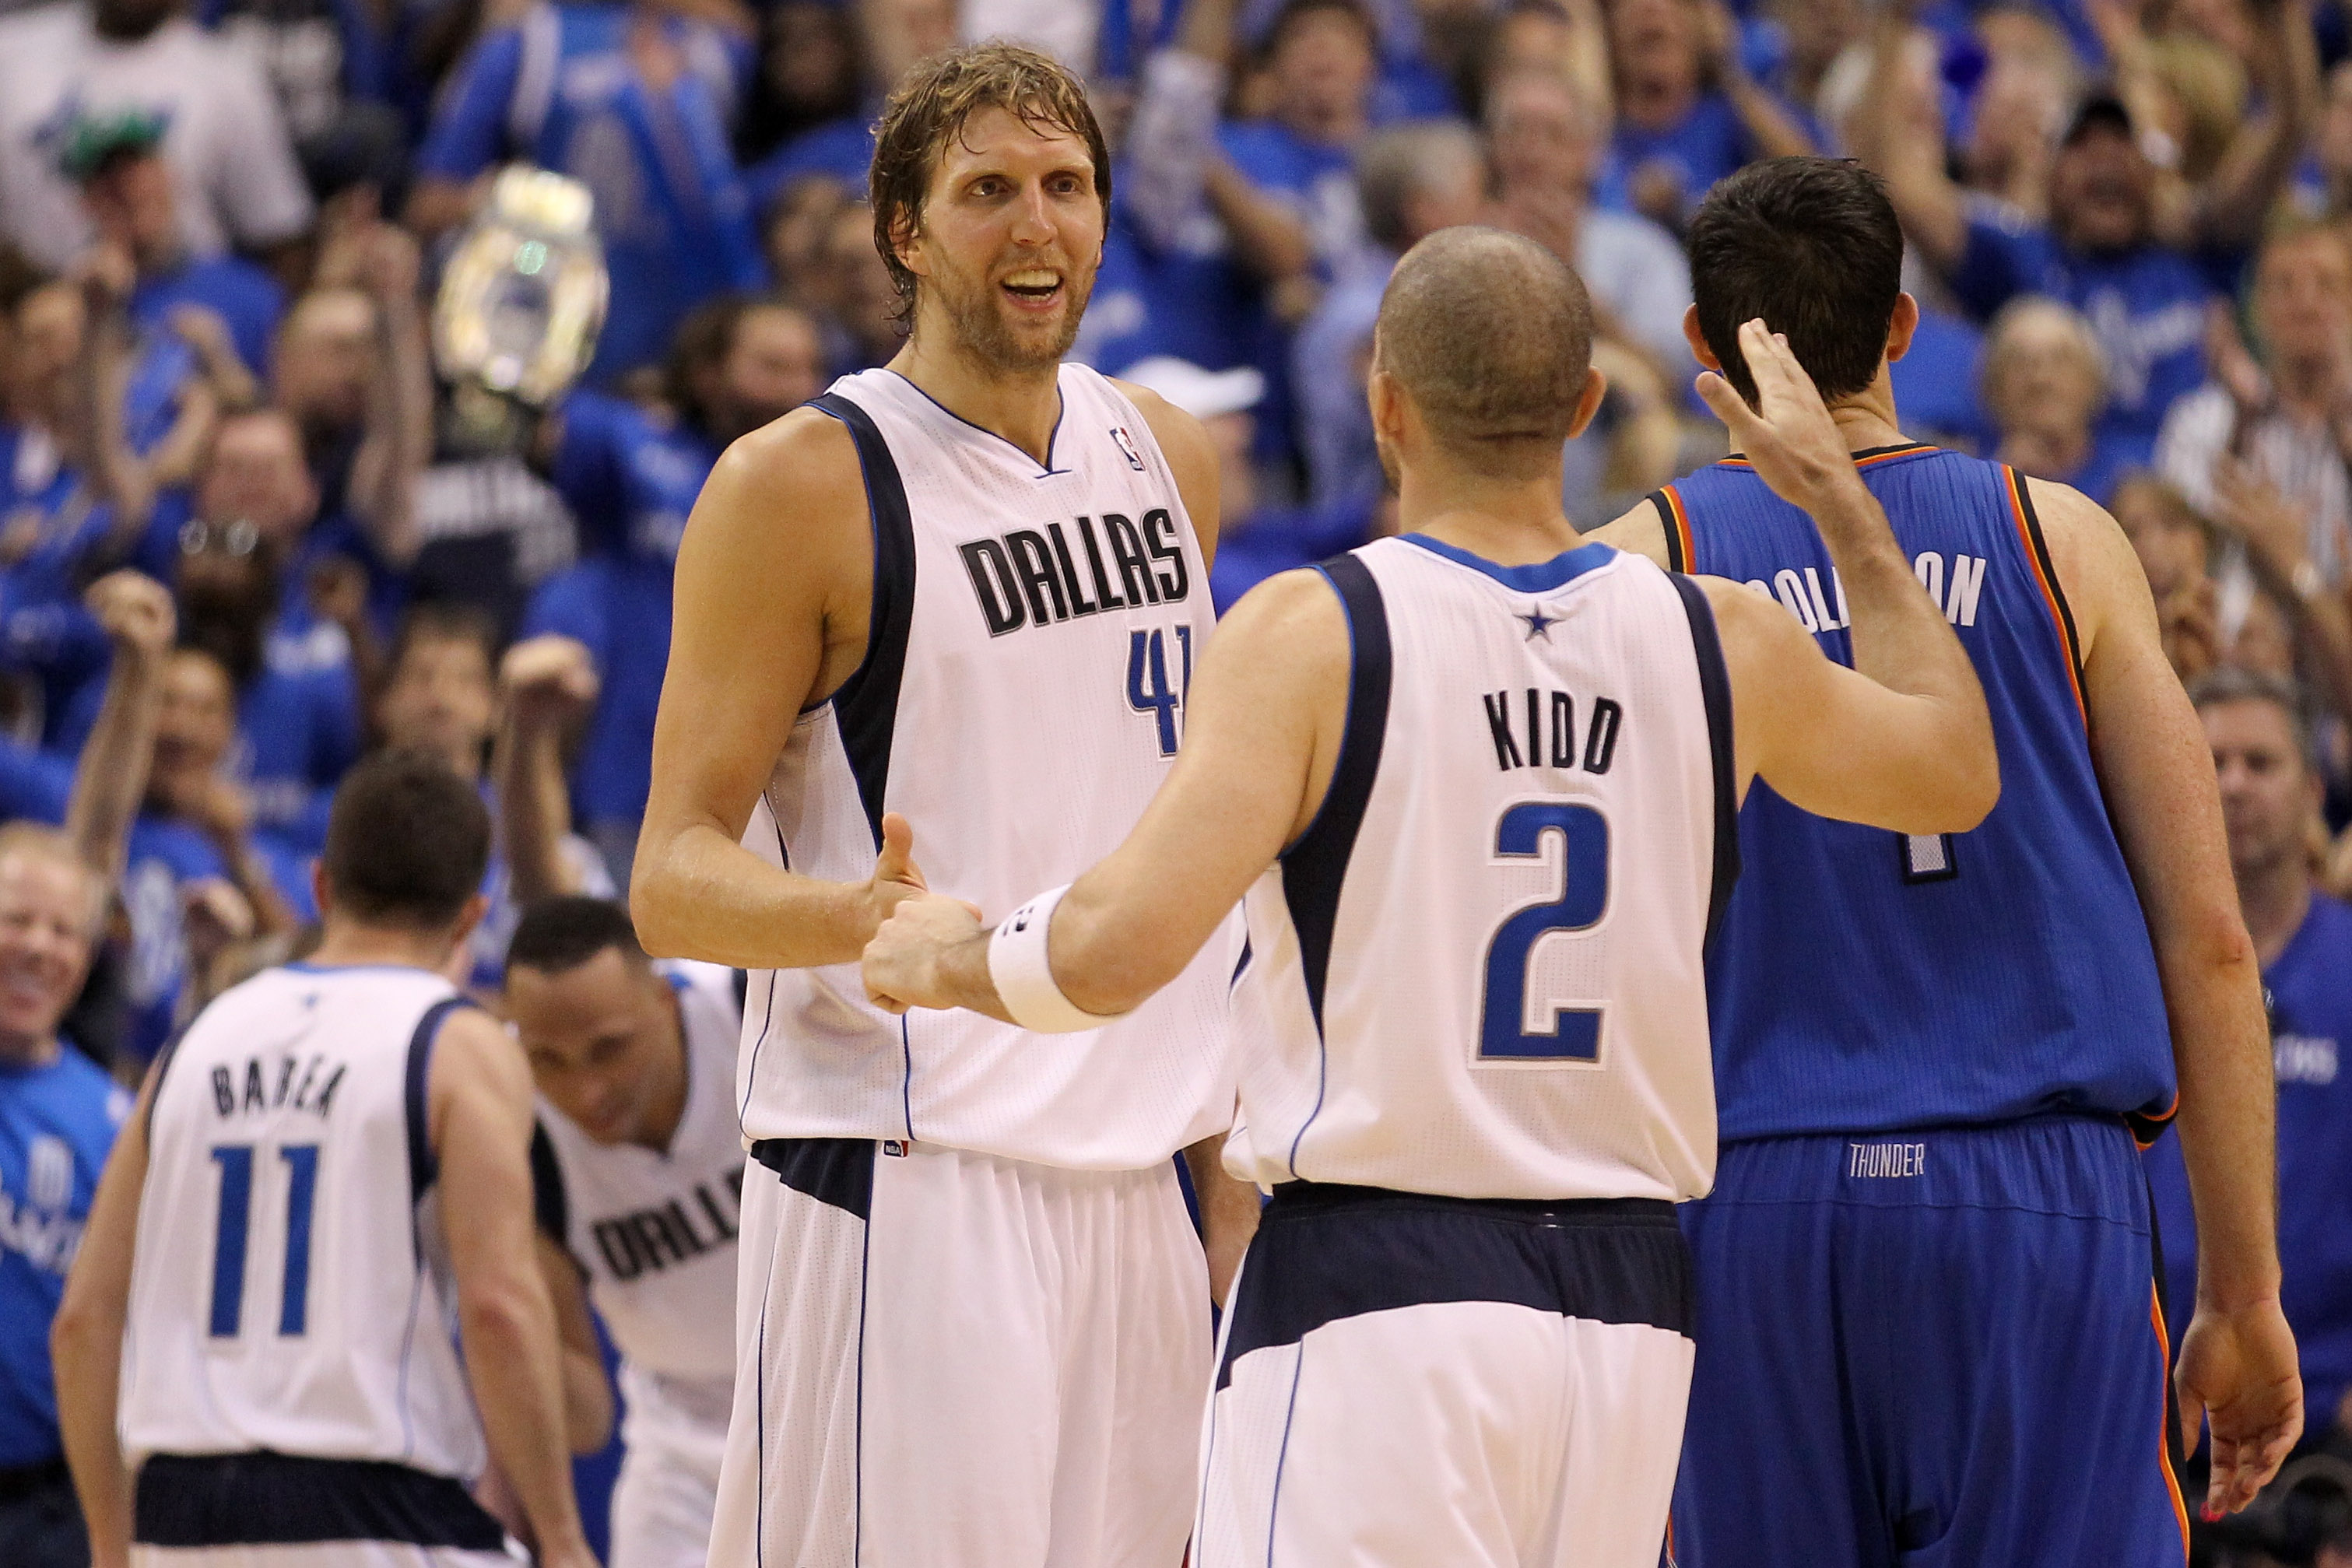 Commentary: Dallas Mavericks' Dirk Nowitzki a clutch performer in Game 2 of  NBA Finals